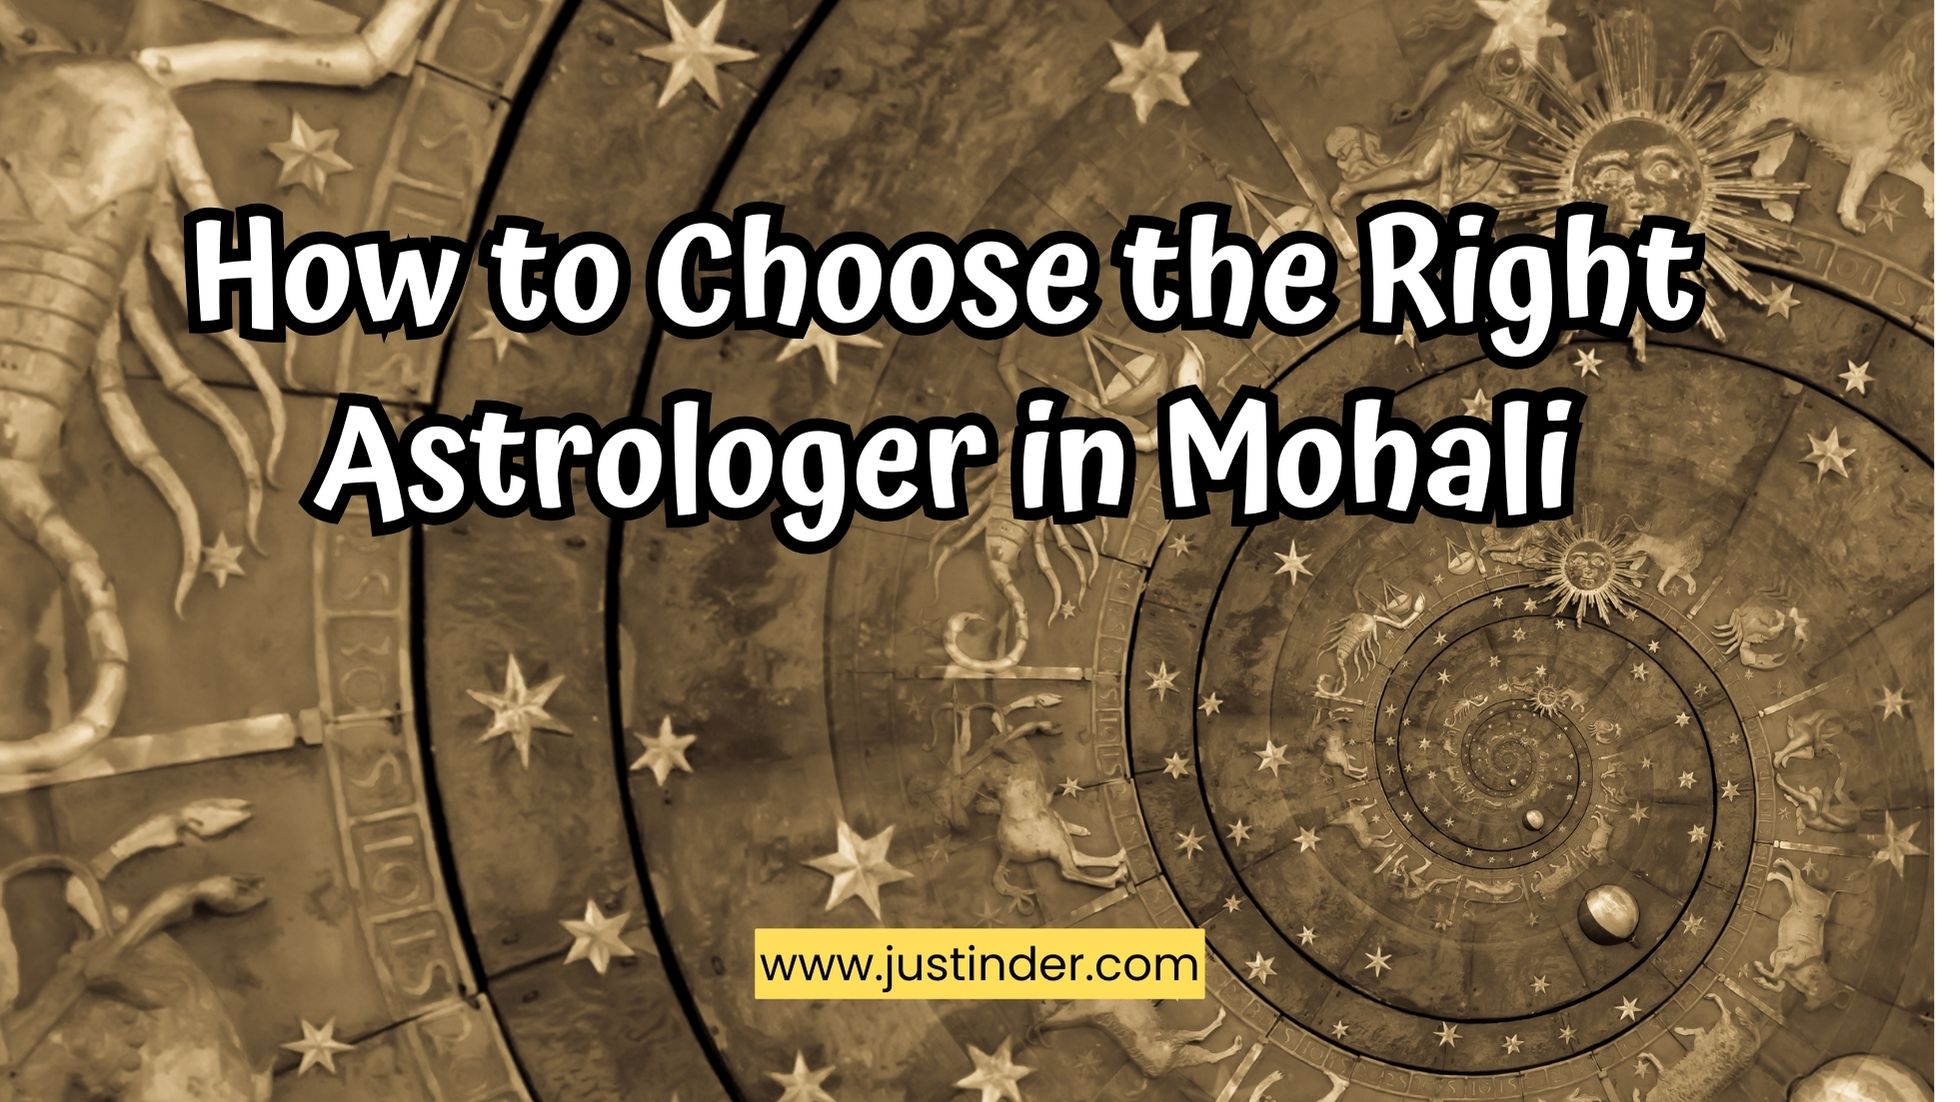 How to Choose the Right Astrologer in Mohali